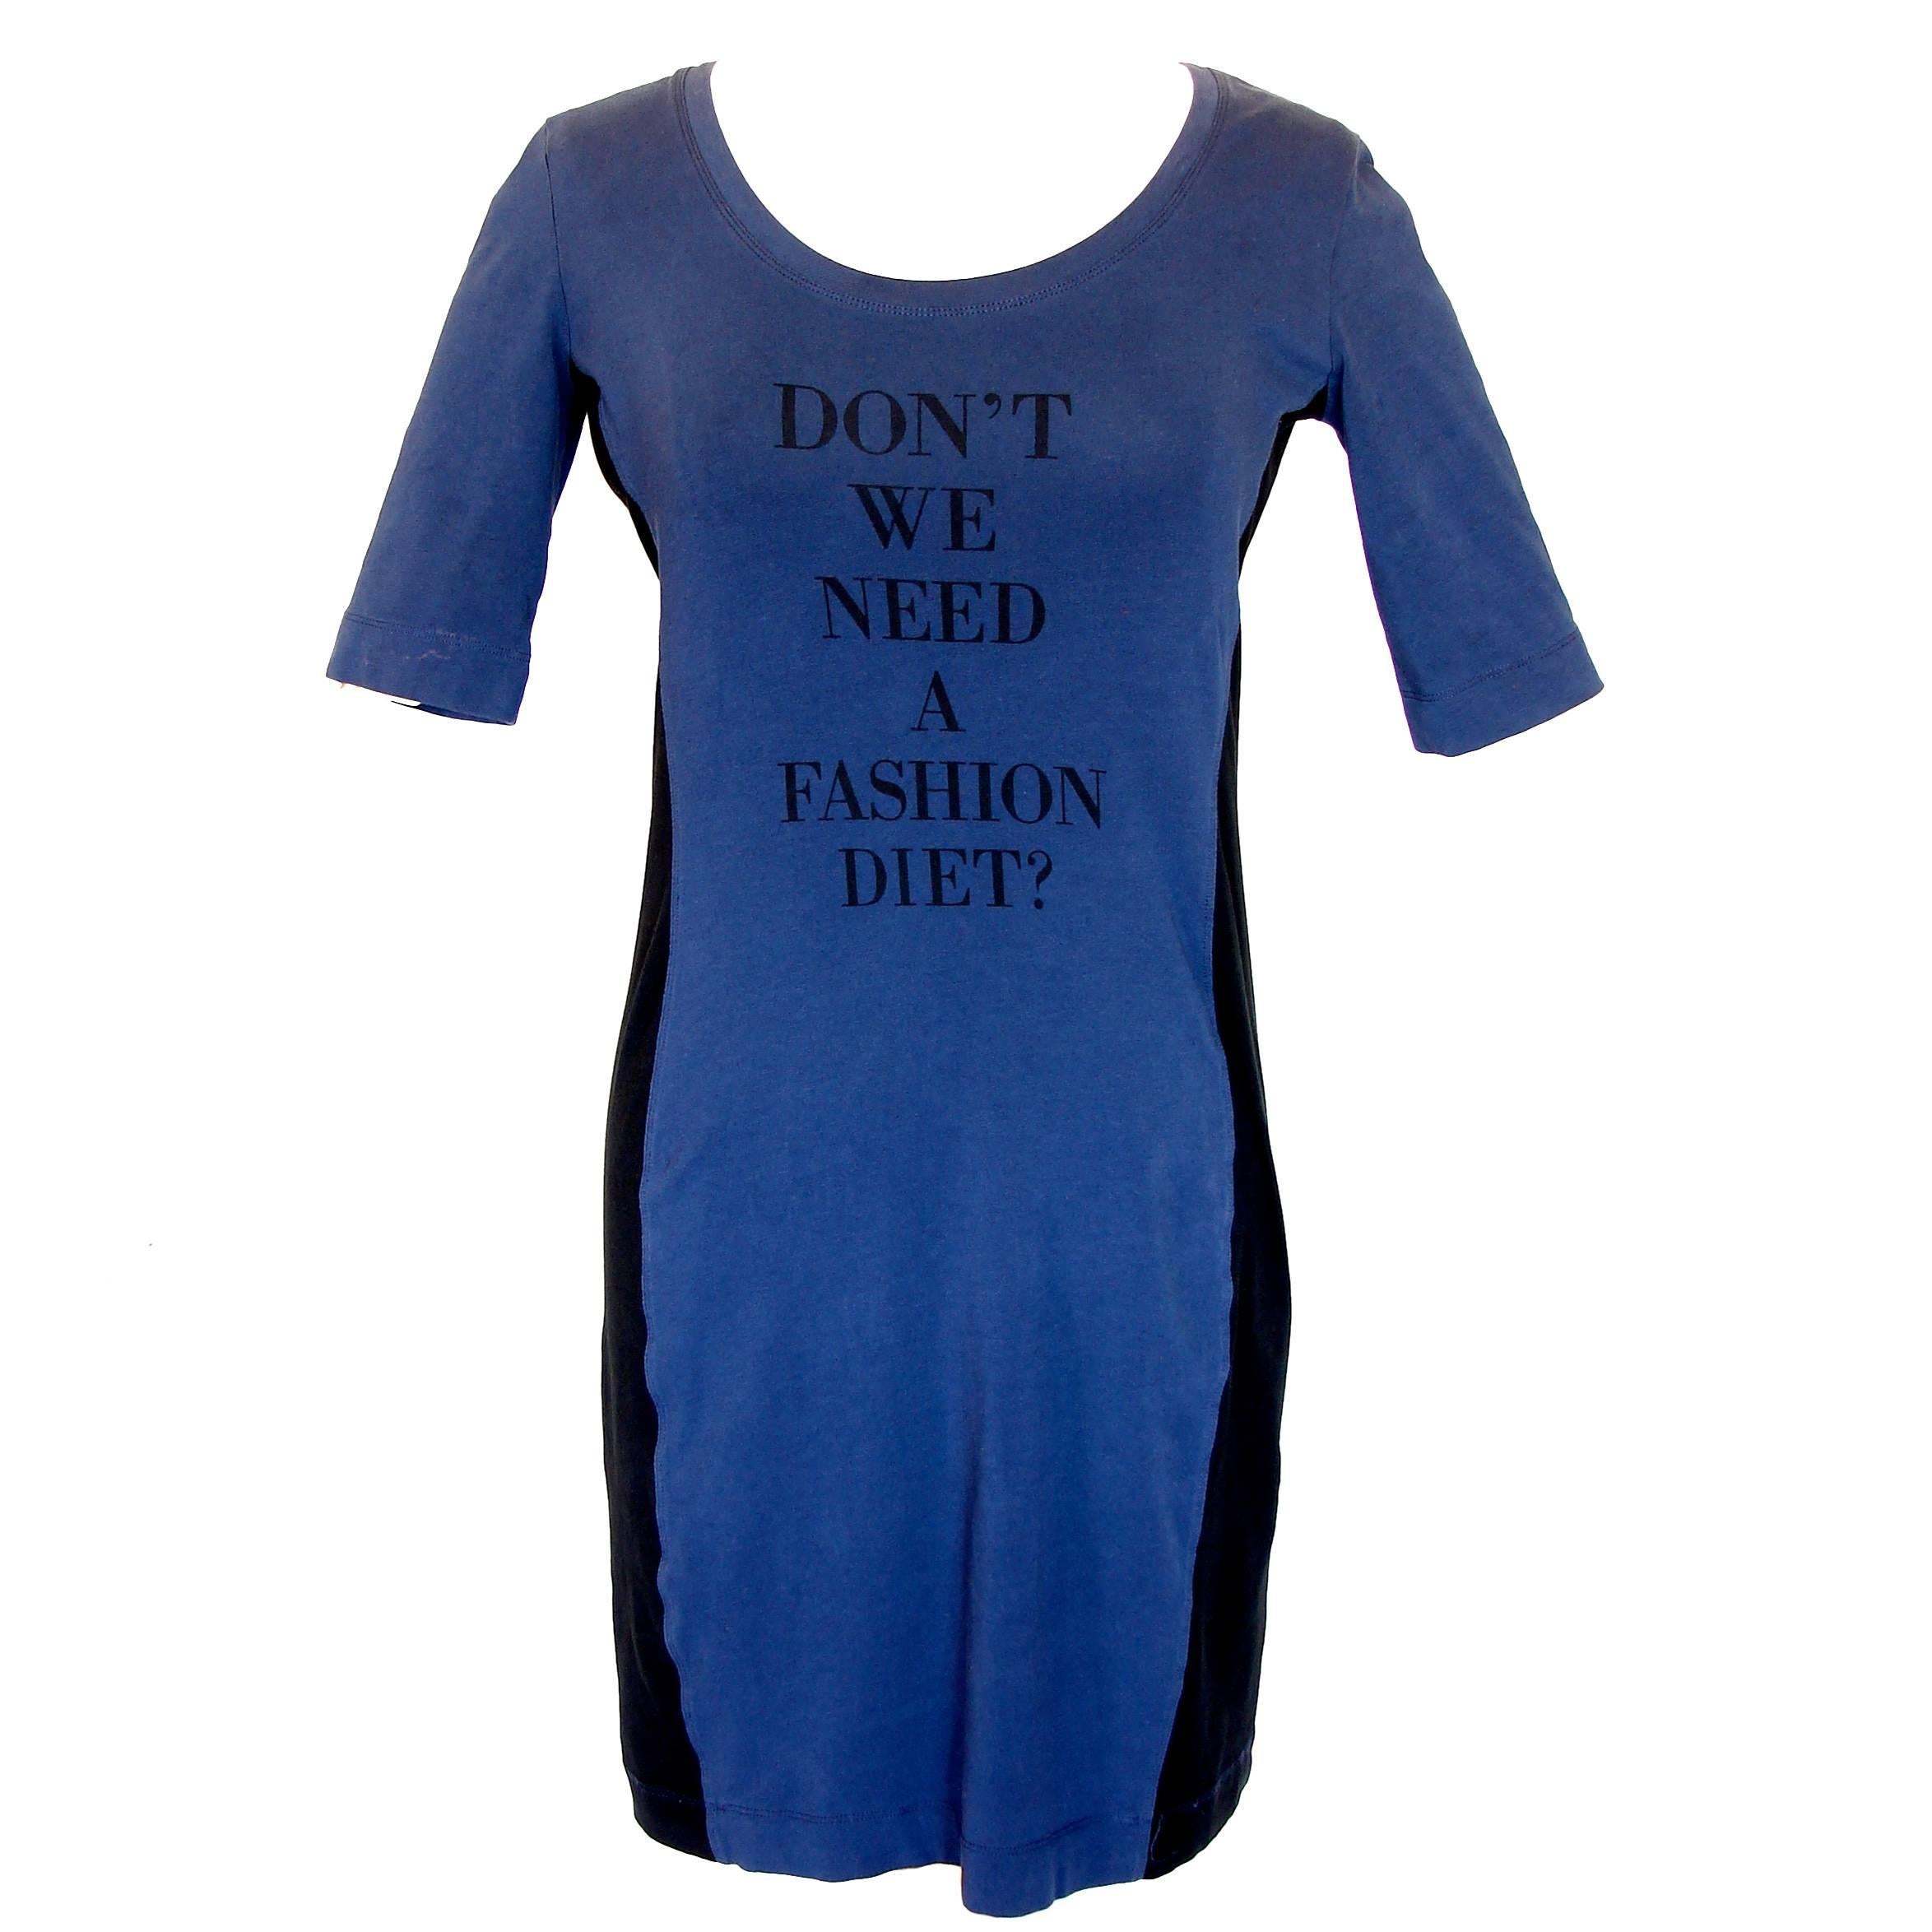 Moschino Don't We Need A Fashion Diet Blue + Black Illusion Dress Size 8 1980s